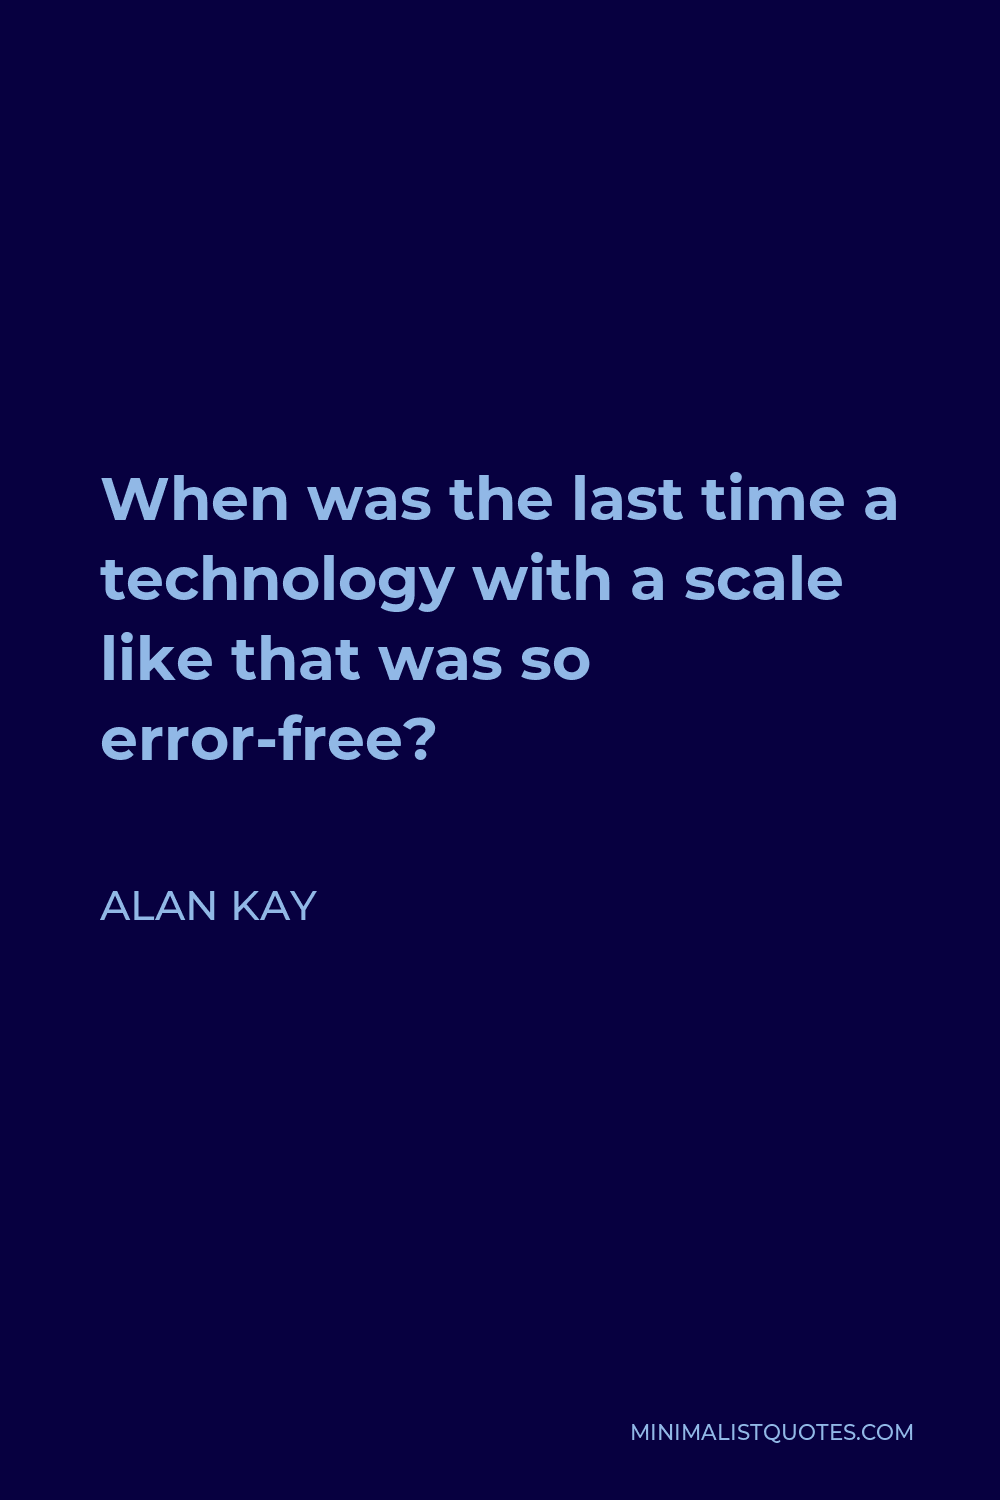 Alan Kay Quote - When was the last time a technology with a scale like that was so error-free?